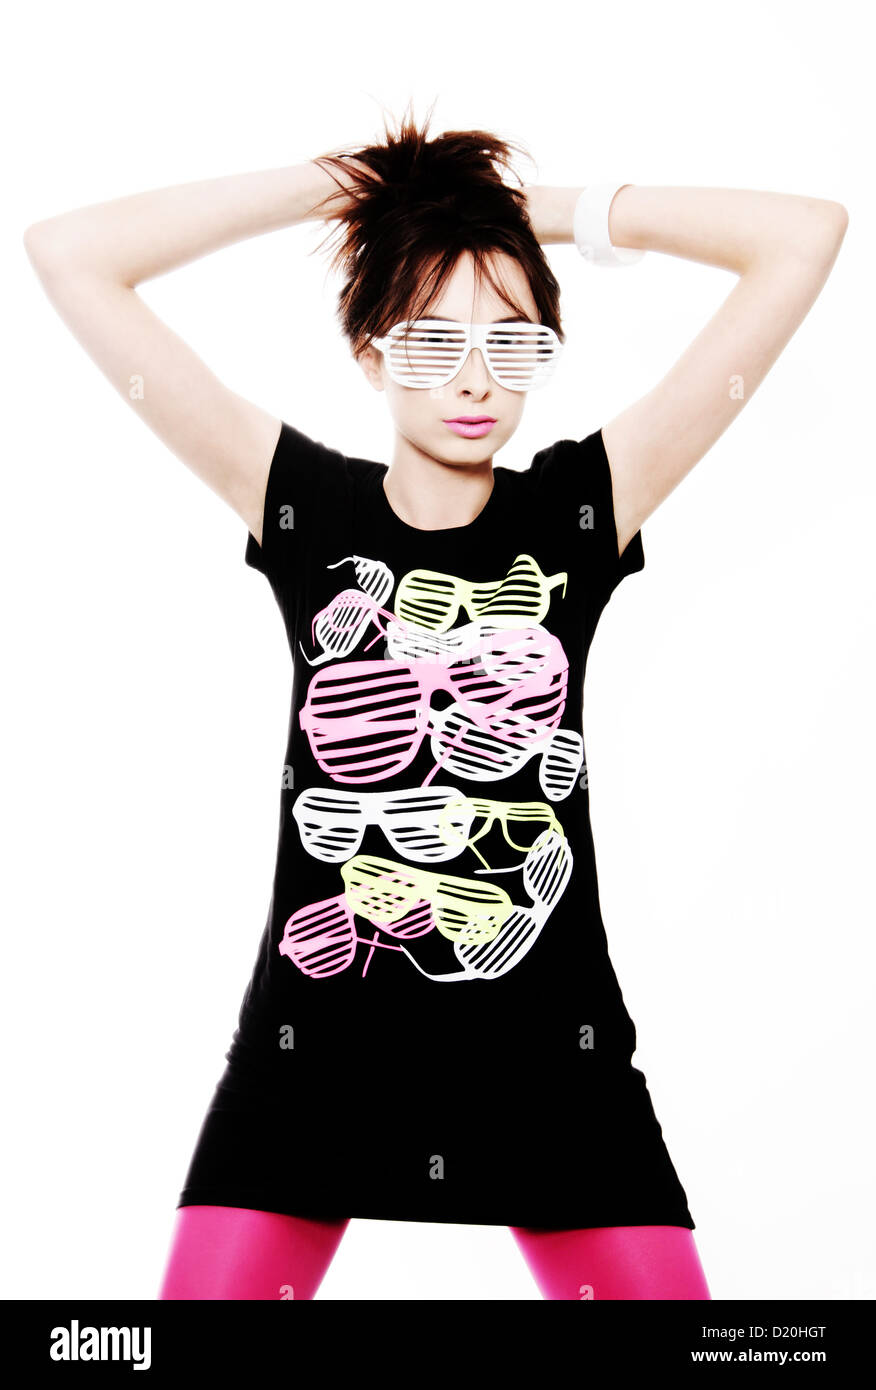 Woman 24 Posing With A Cool Pair Of Glasses And A Fitting T Shirt Stock Photo Alamy